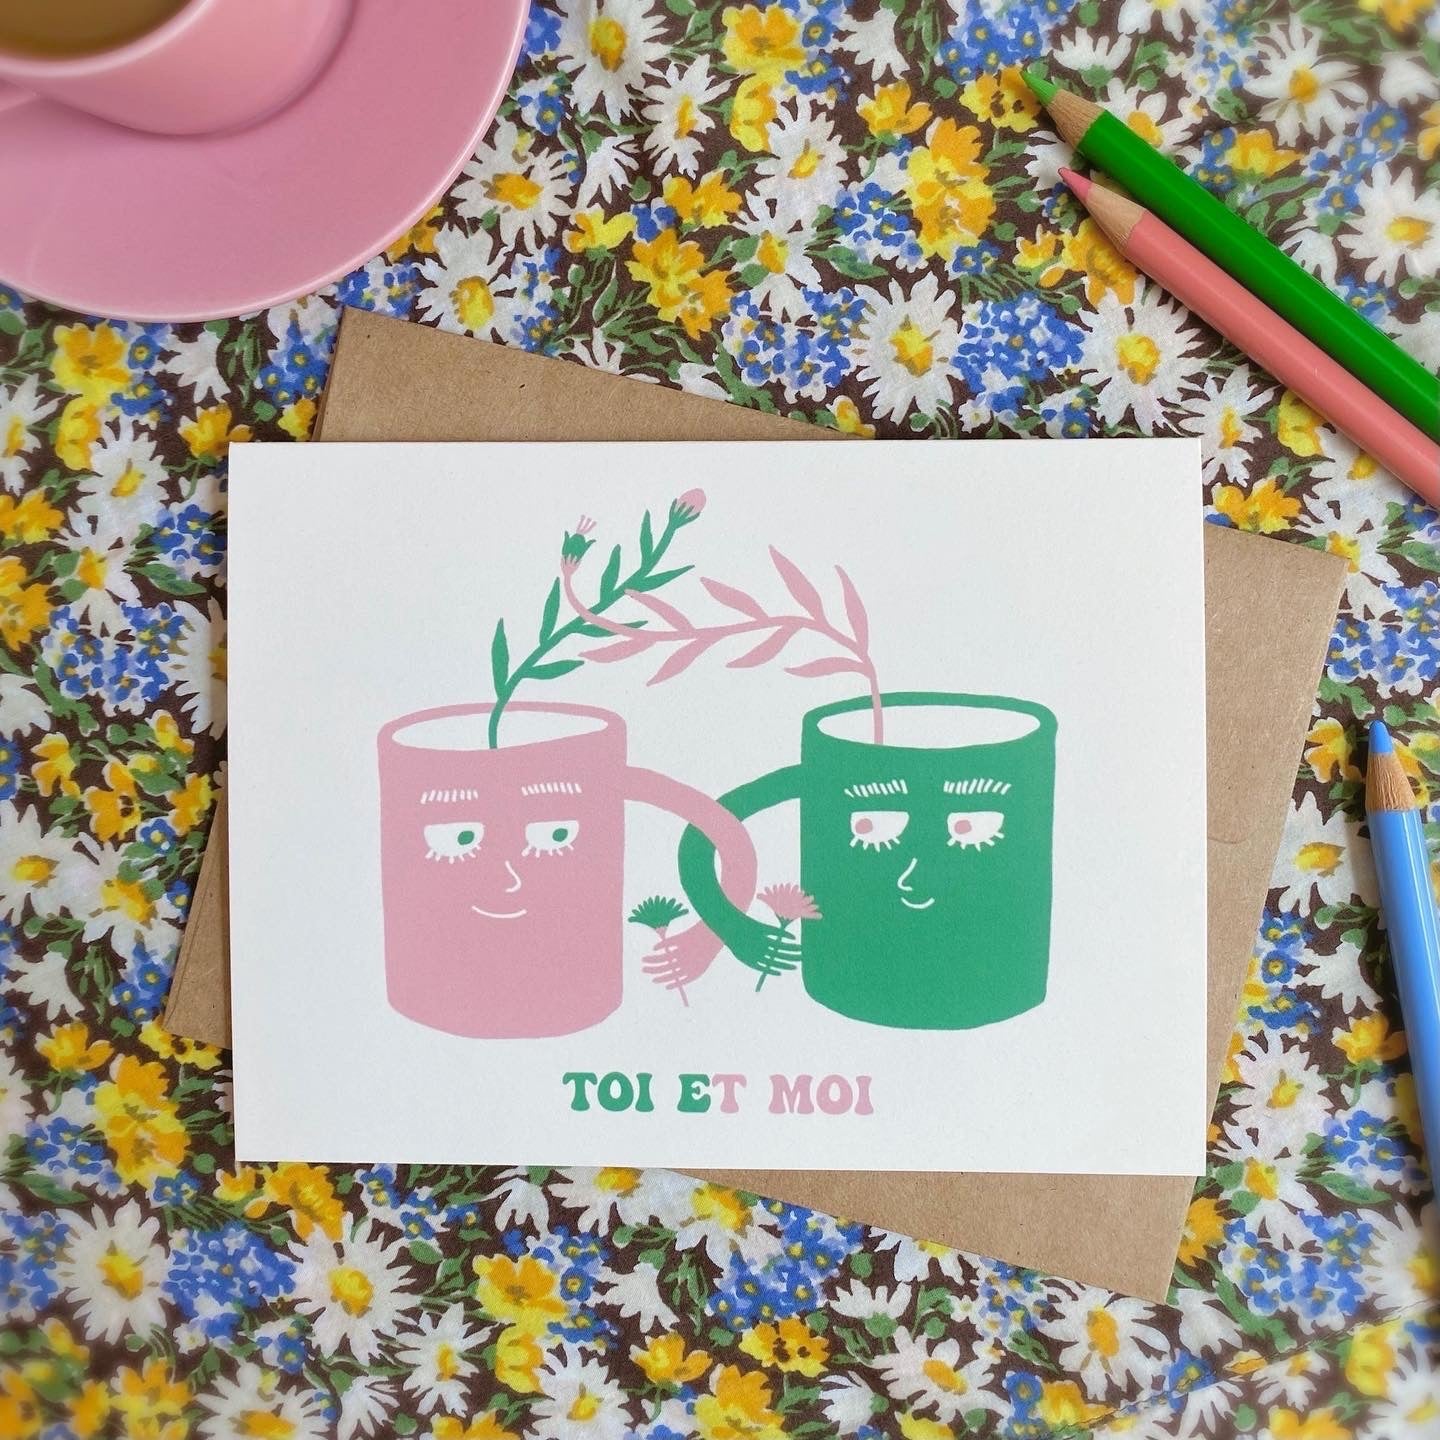 Cute love and friendship card with the illustration of two mugs looking at each other while their handles are intertwined